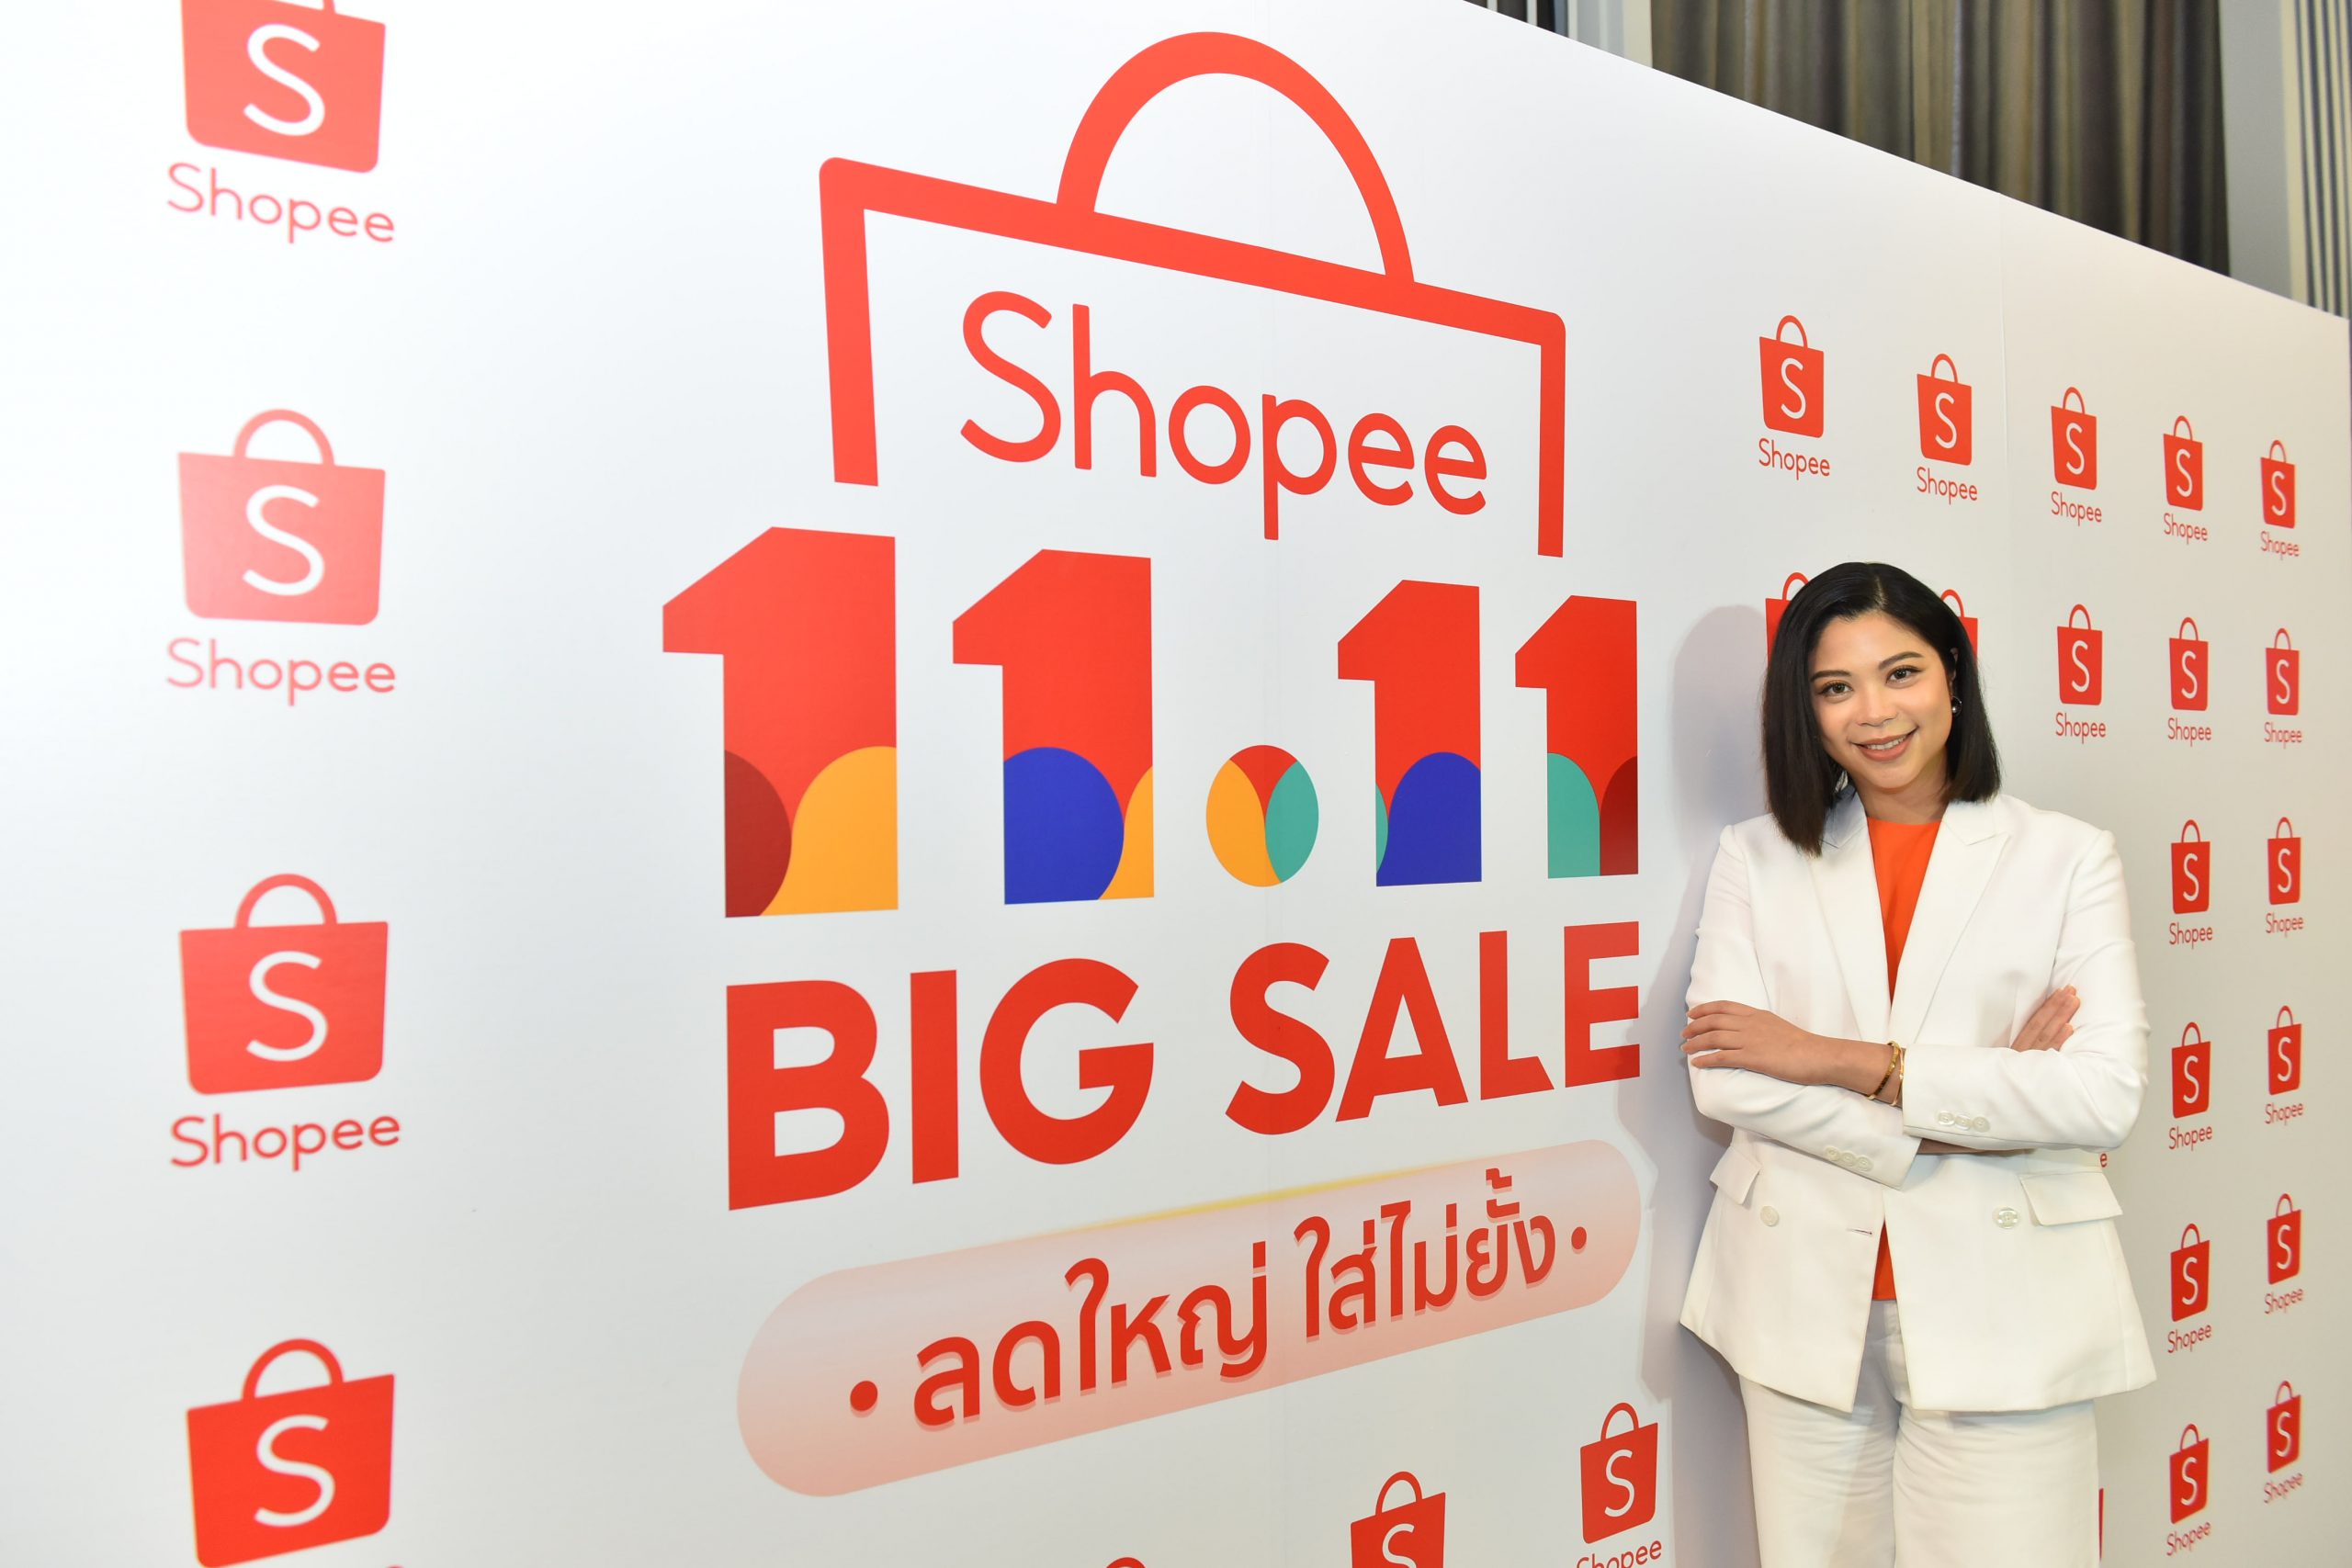 Shopee creates new shopping experience for consumers, entrepreneurs